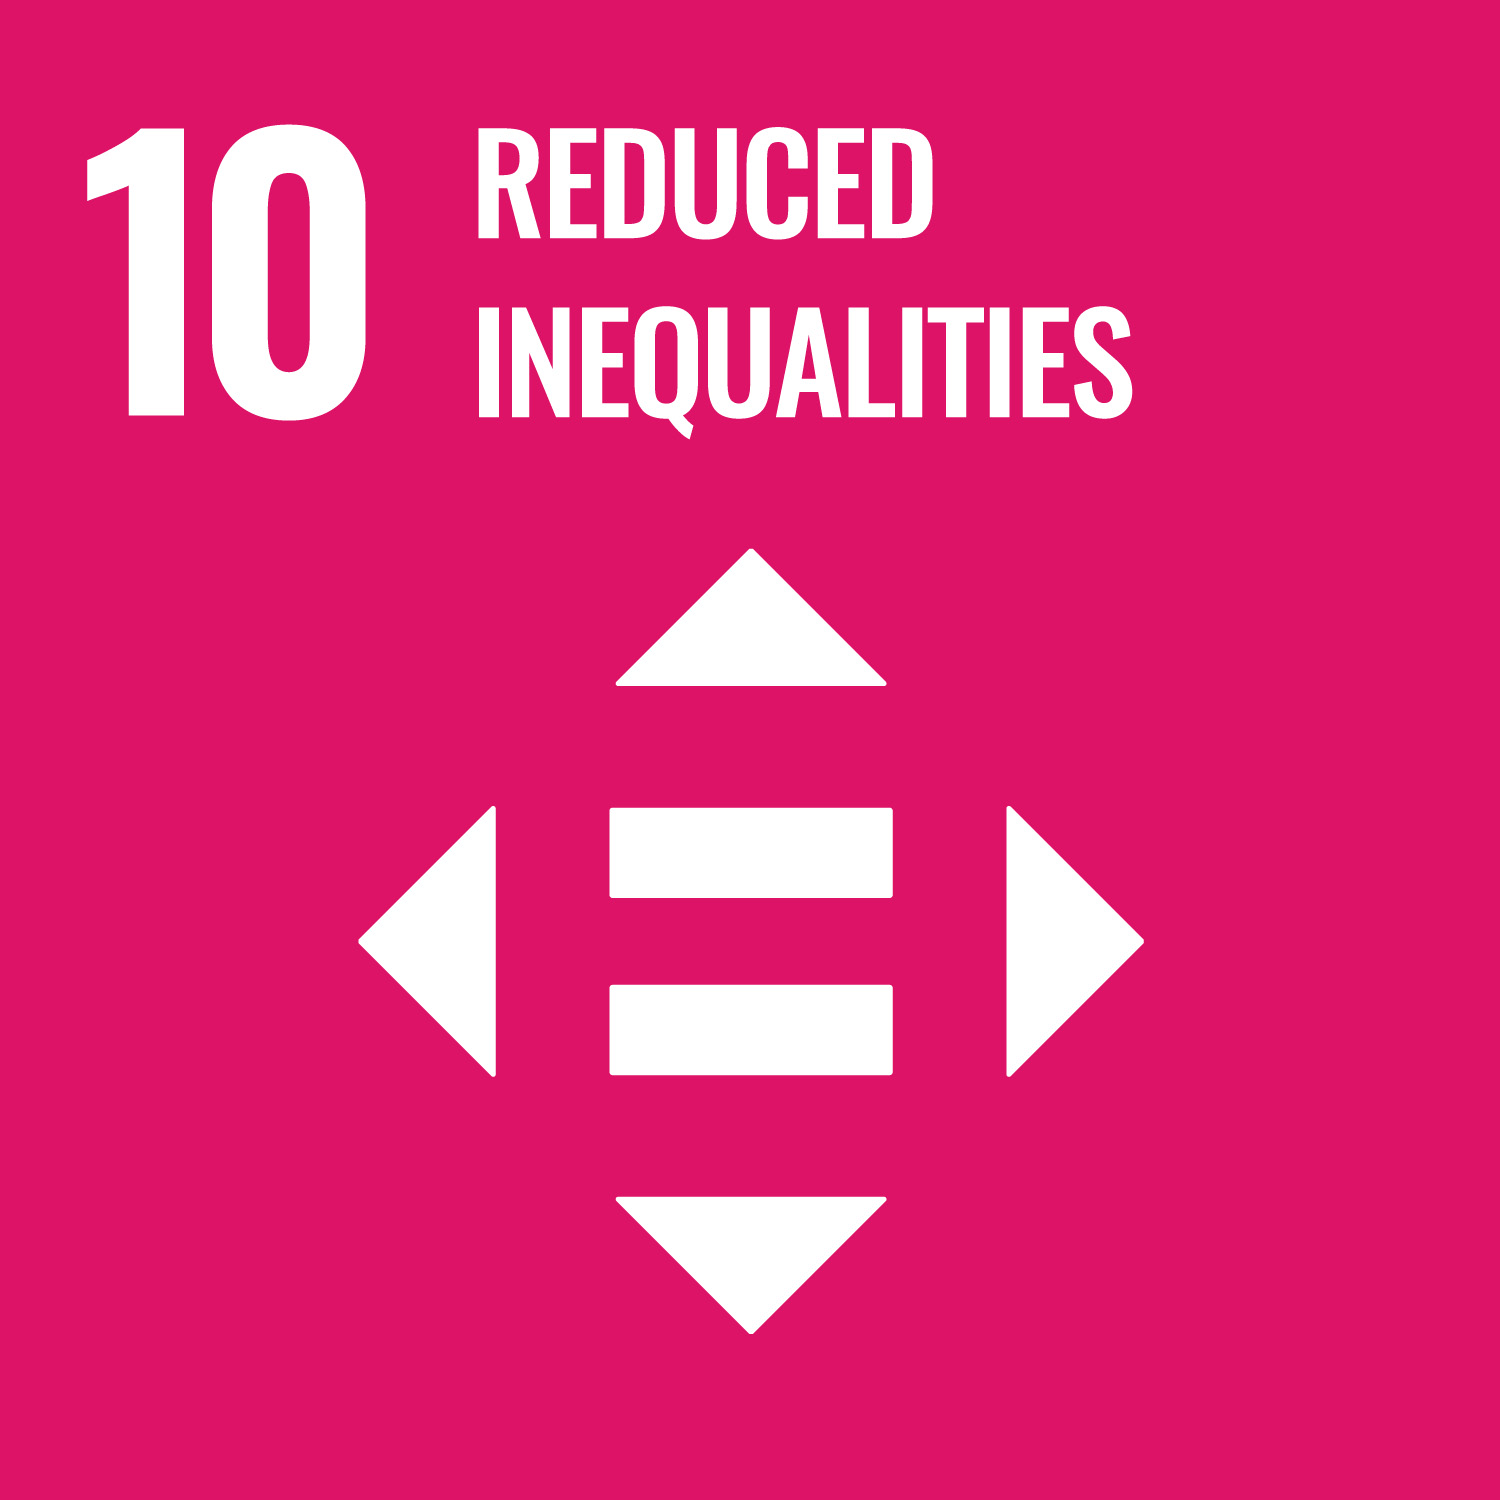 UN logo for reduced inequalities